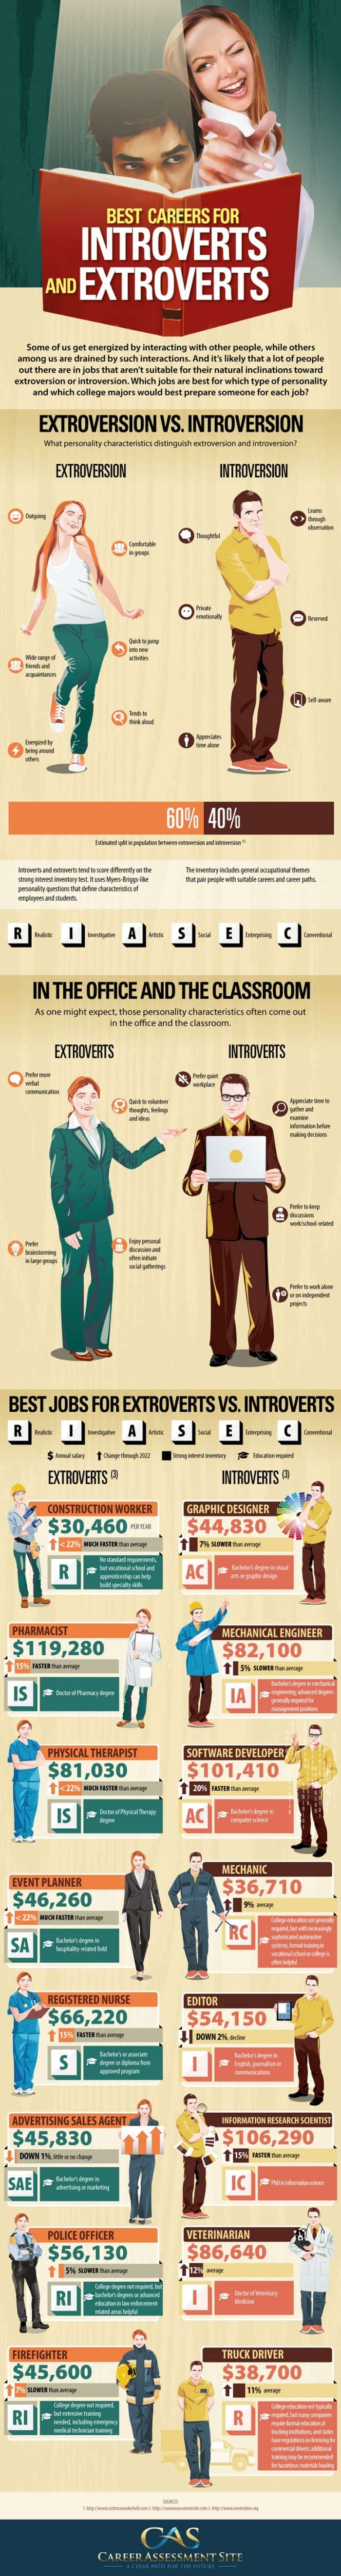 Best Careers For Introverts And Extroverts Infographic